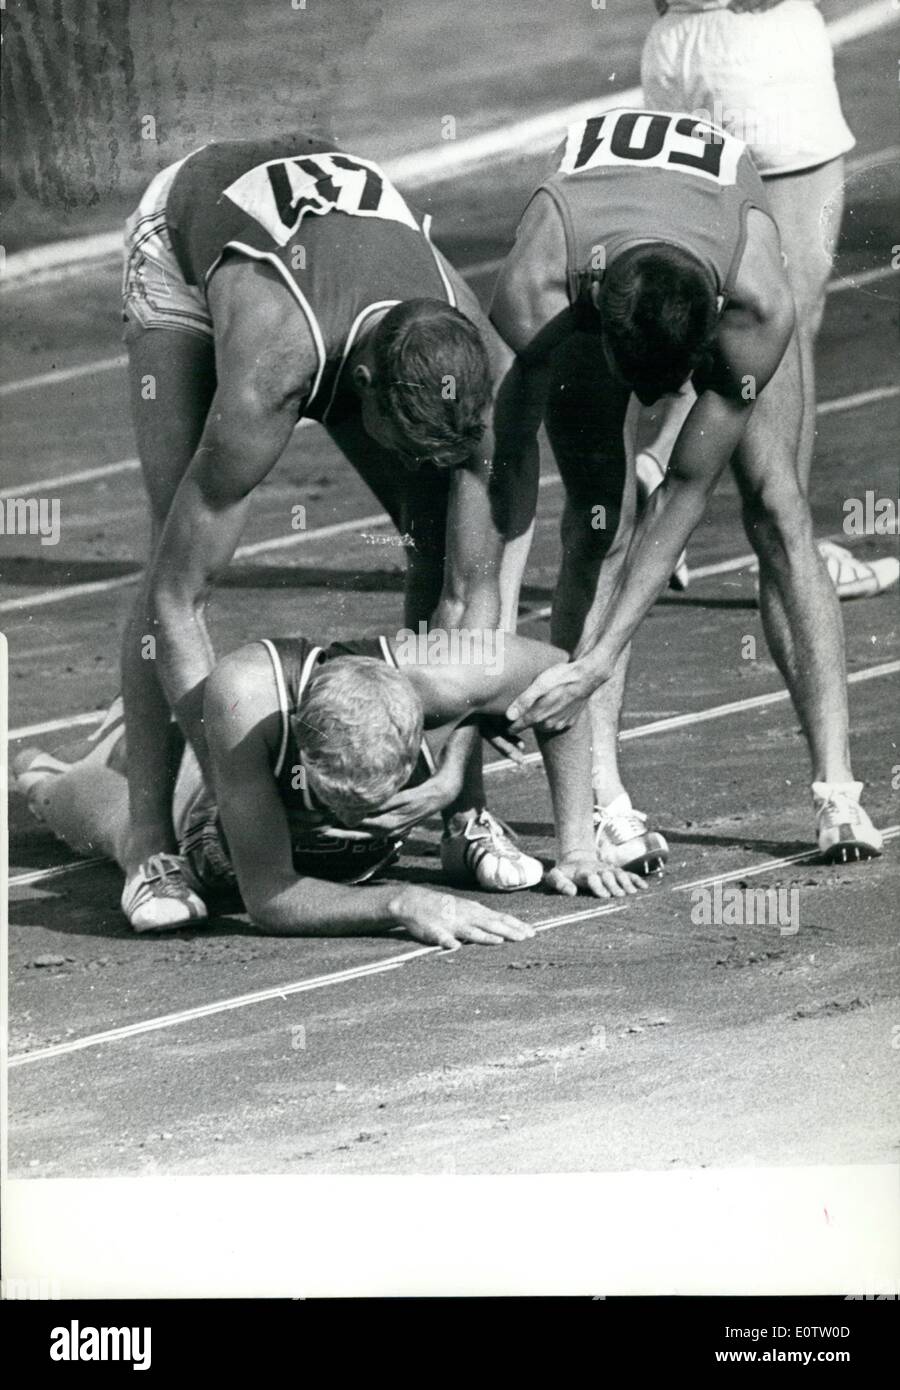 Sep. 09, 1960 - Winner Assists Fellow Countryman. Cliff Cushman (USA) fell as he passed the finishing line taking second place in the 400 metres Hudles final this afternoon. Winner was G. Davis with Richard Howard in third place. All Americans. Photo shows Cushman is assisted by Glenn Davis (left) and John Rintamaki (Finland) (501) after falling. Stock Photo